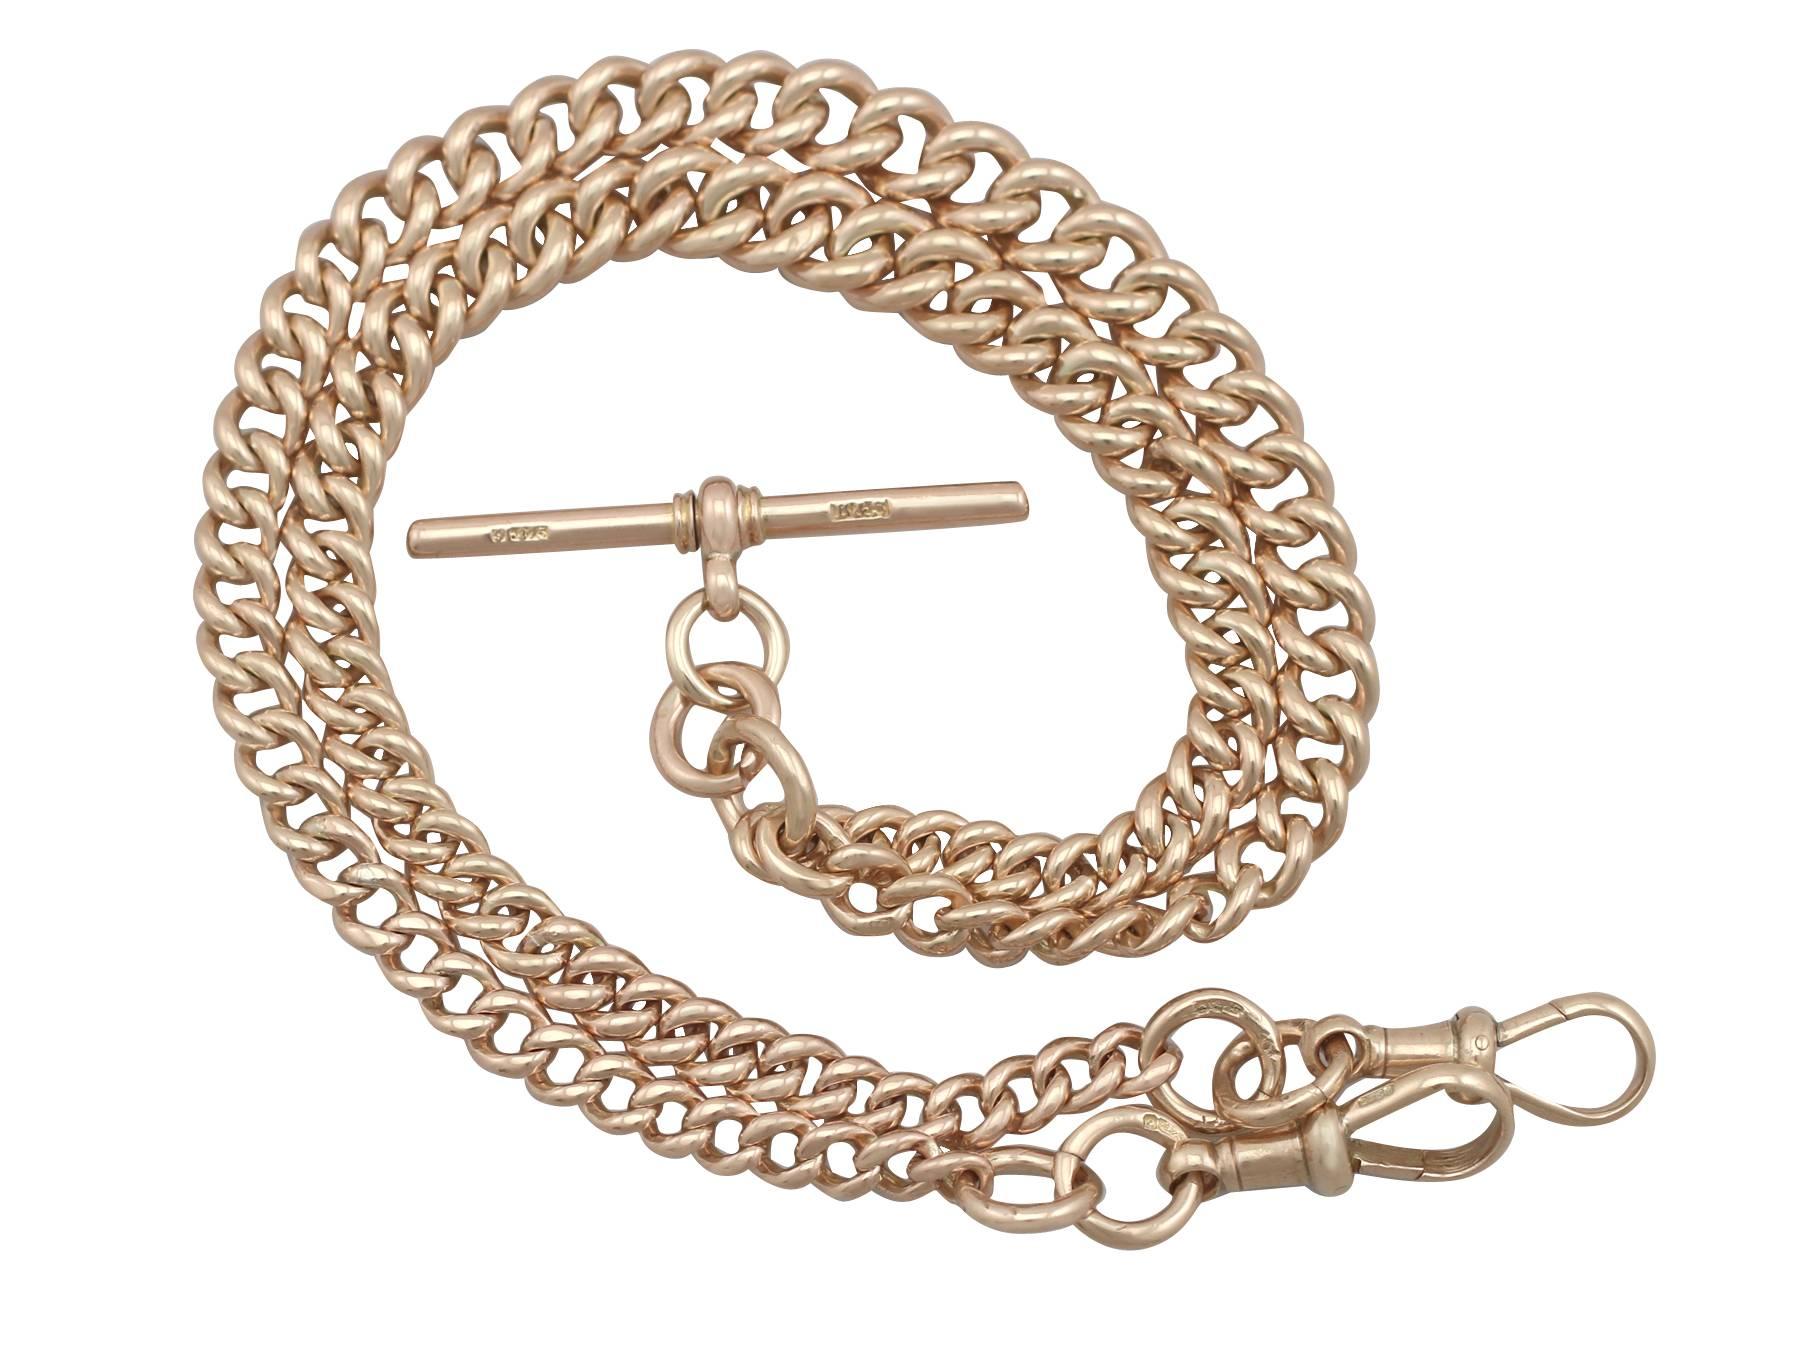 An exceptional English antique 9 karat yellow gold double Albert watch chain; part of our diverse antique jewelry and estate jewelry collections

This exceptional, fine and impressive double Albert watch chain has been crafted in 9k yellow